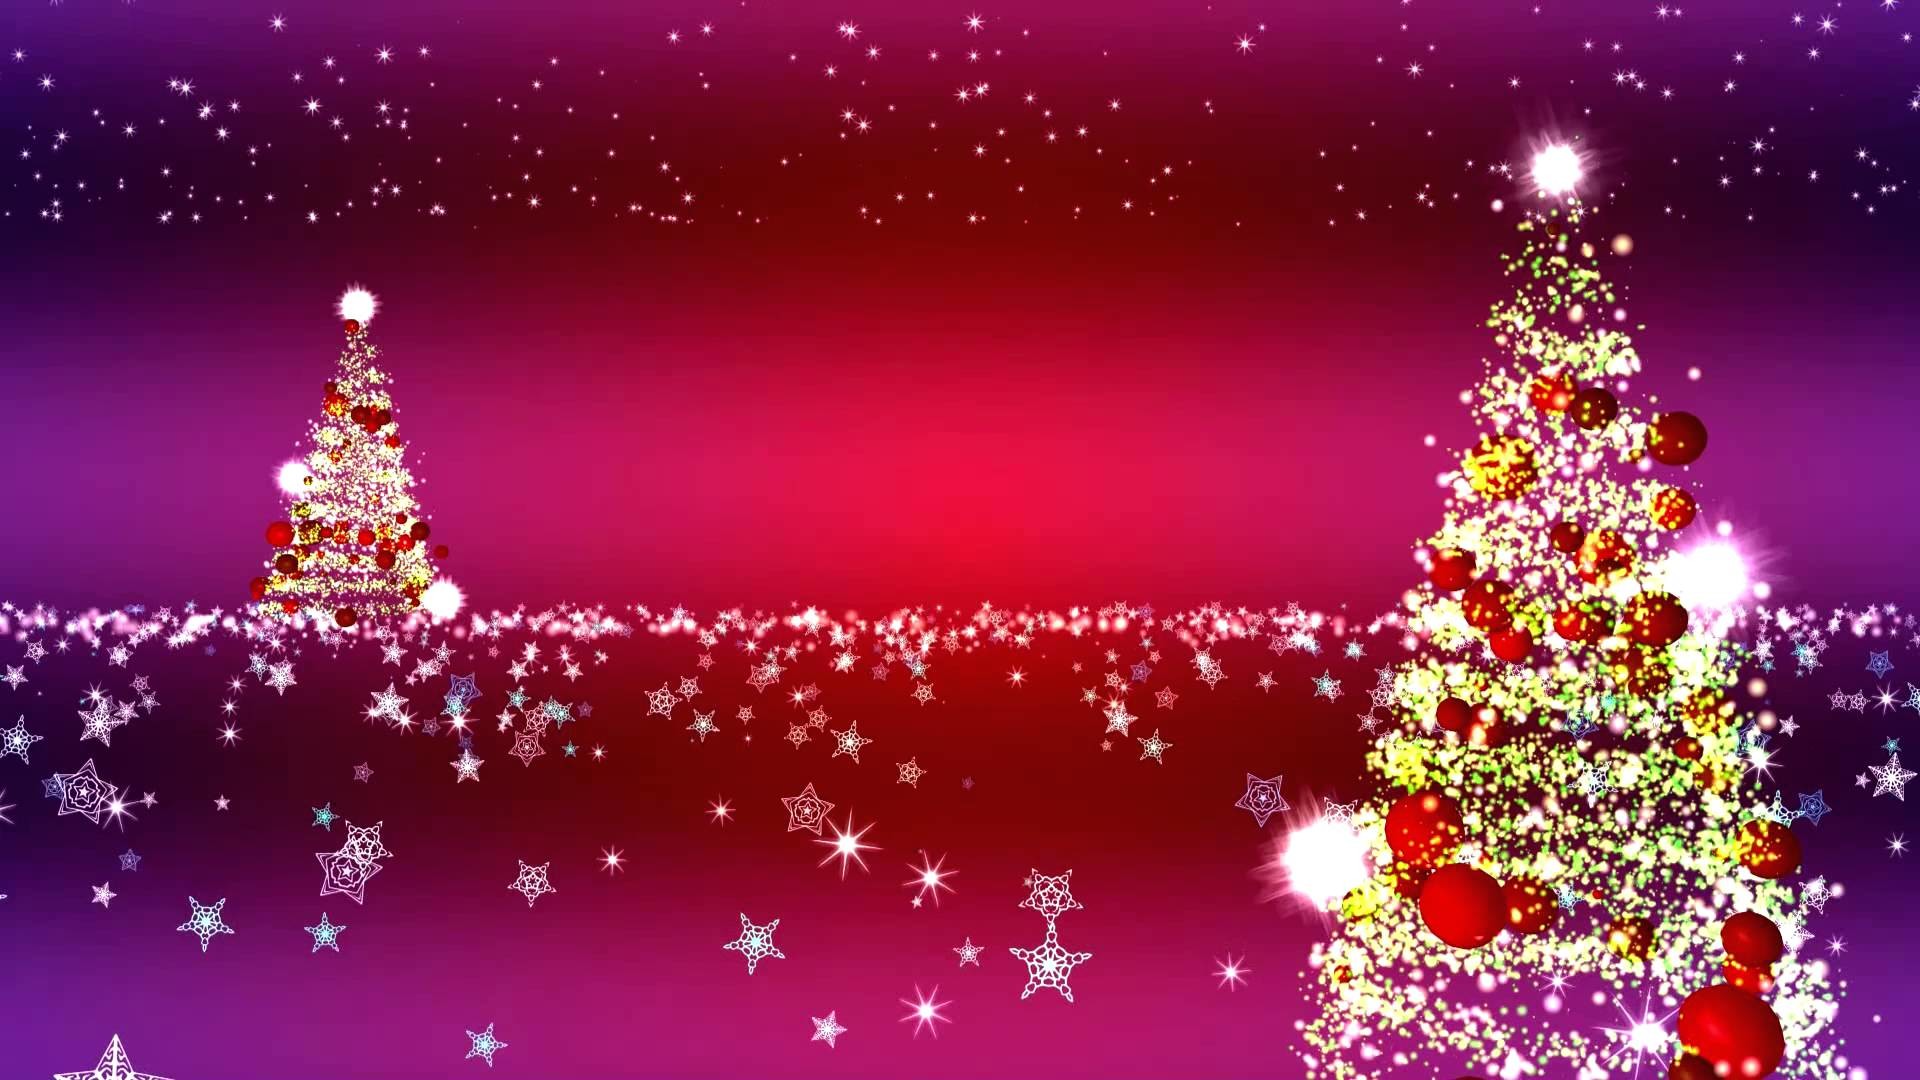 1920x1080 2015 Christmas background hd wallpapers images photos 